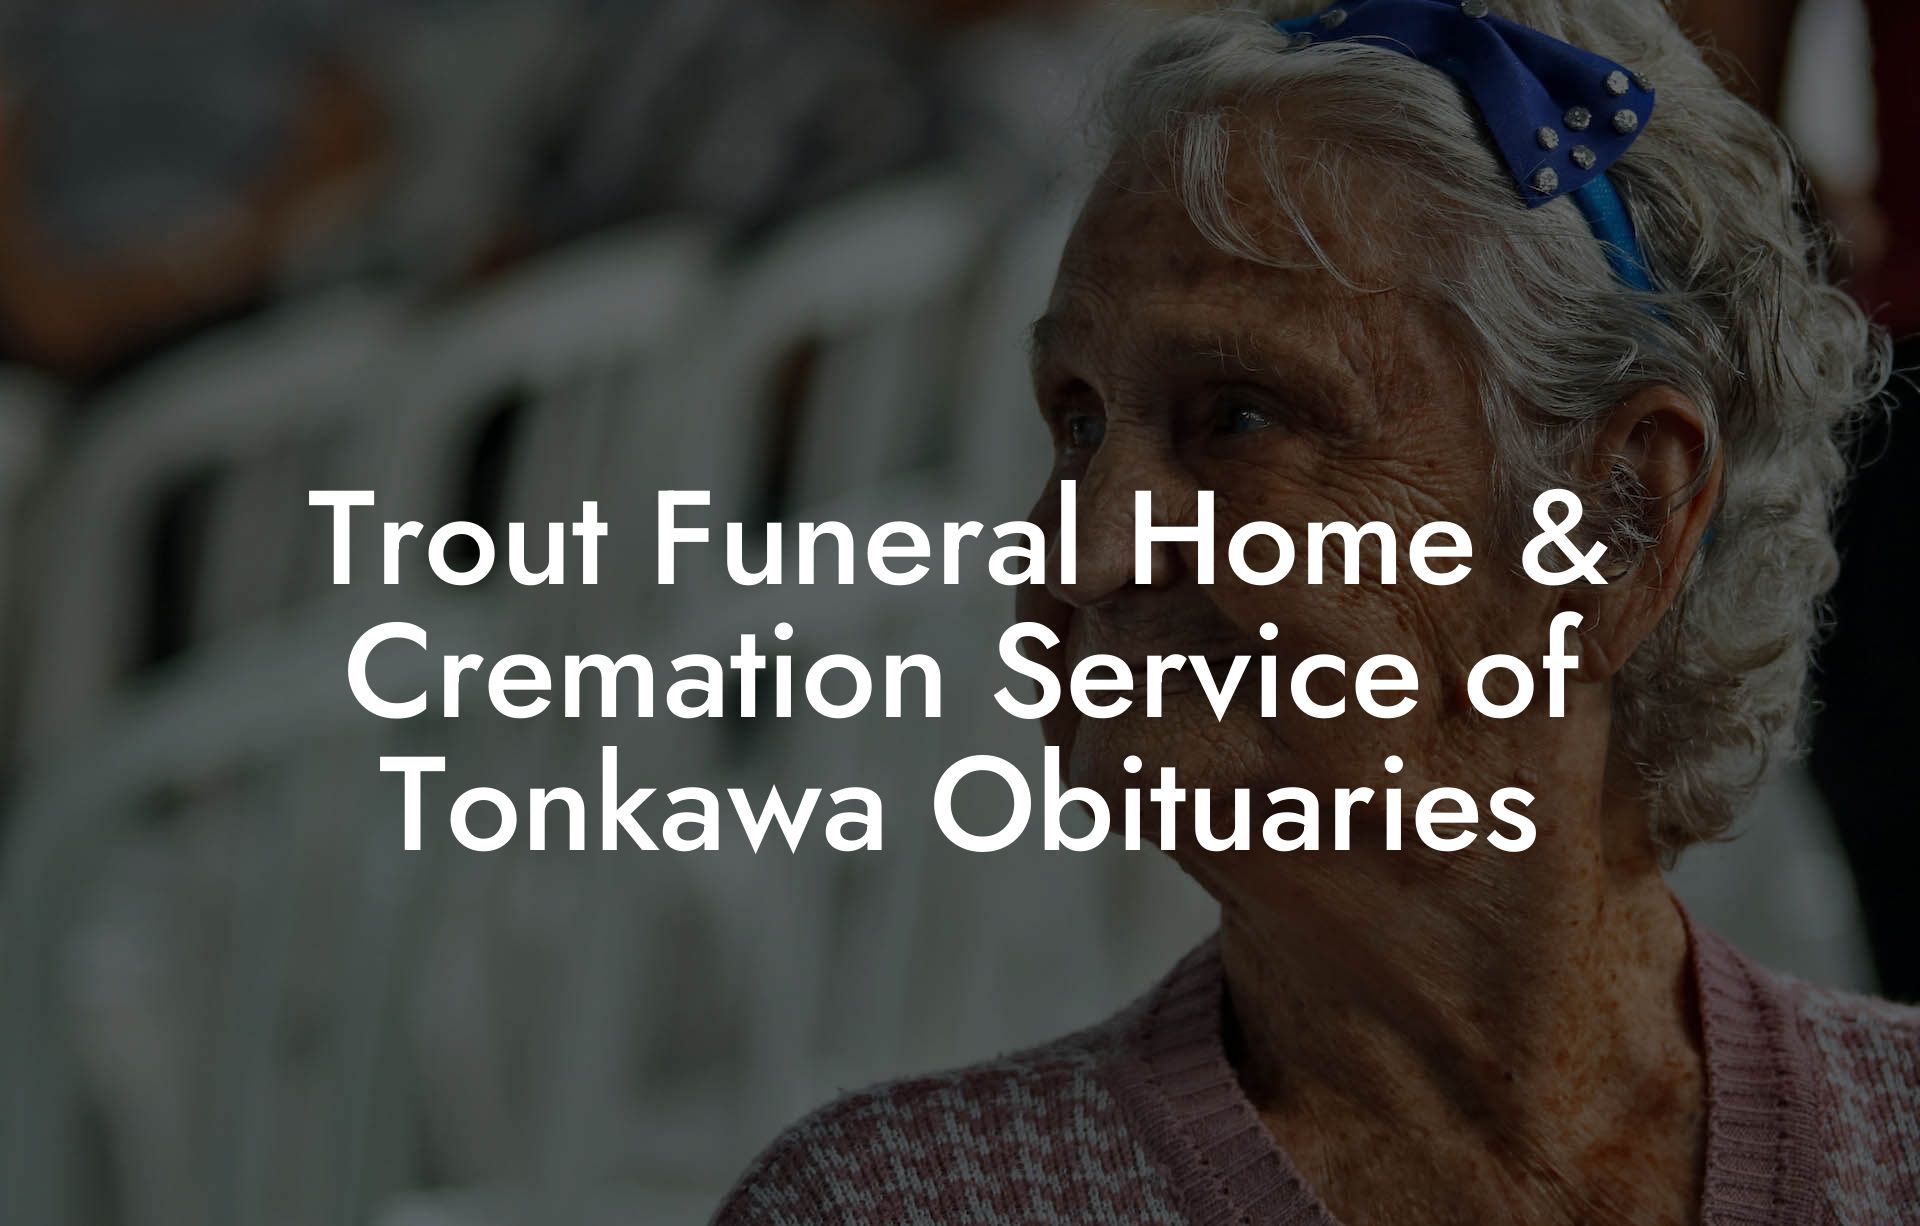 Trout Funeral Home & Cremation Service of Tonkawa Obituaries